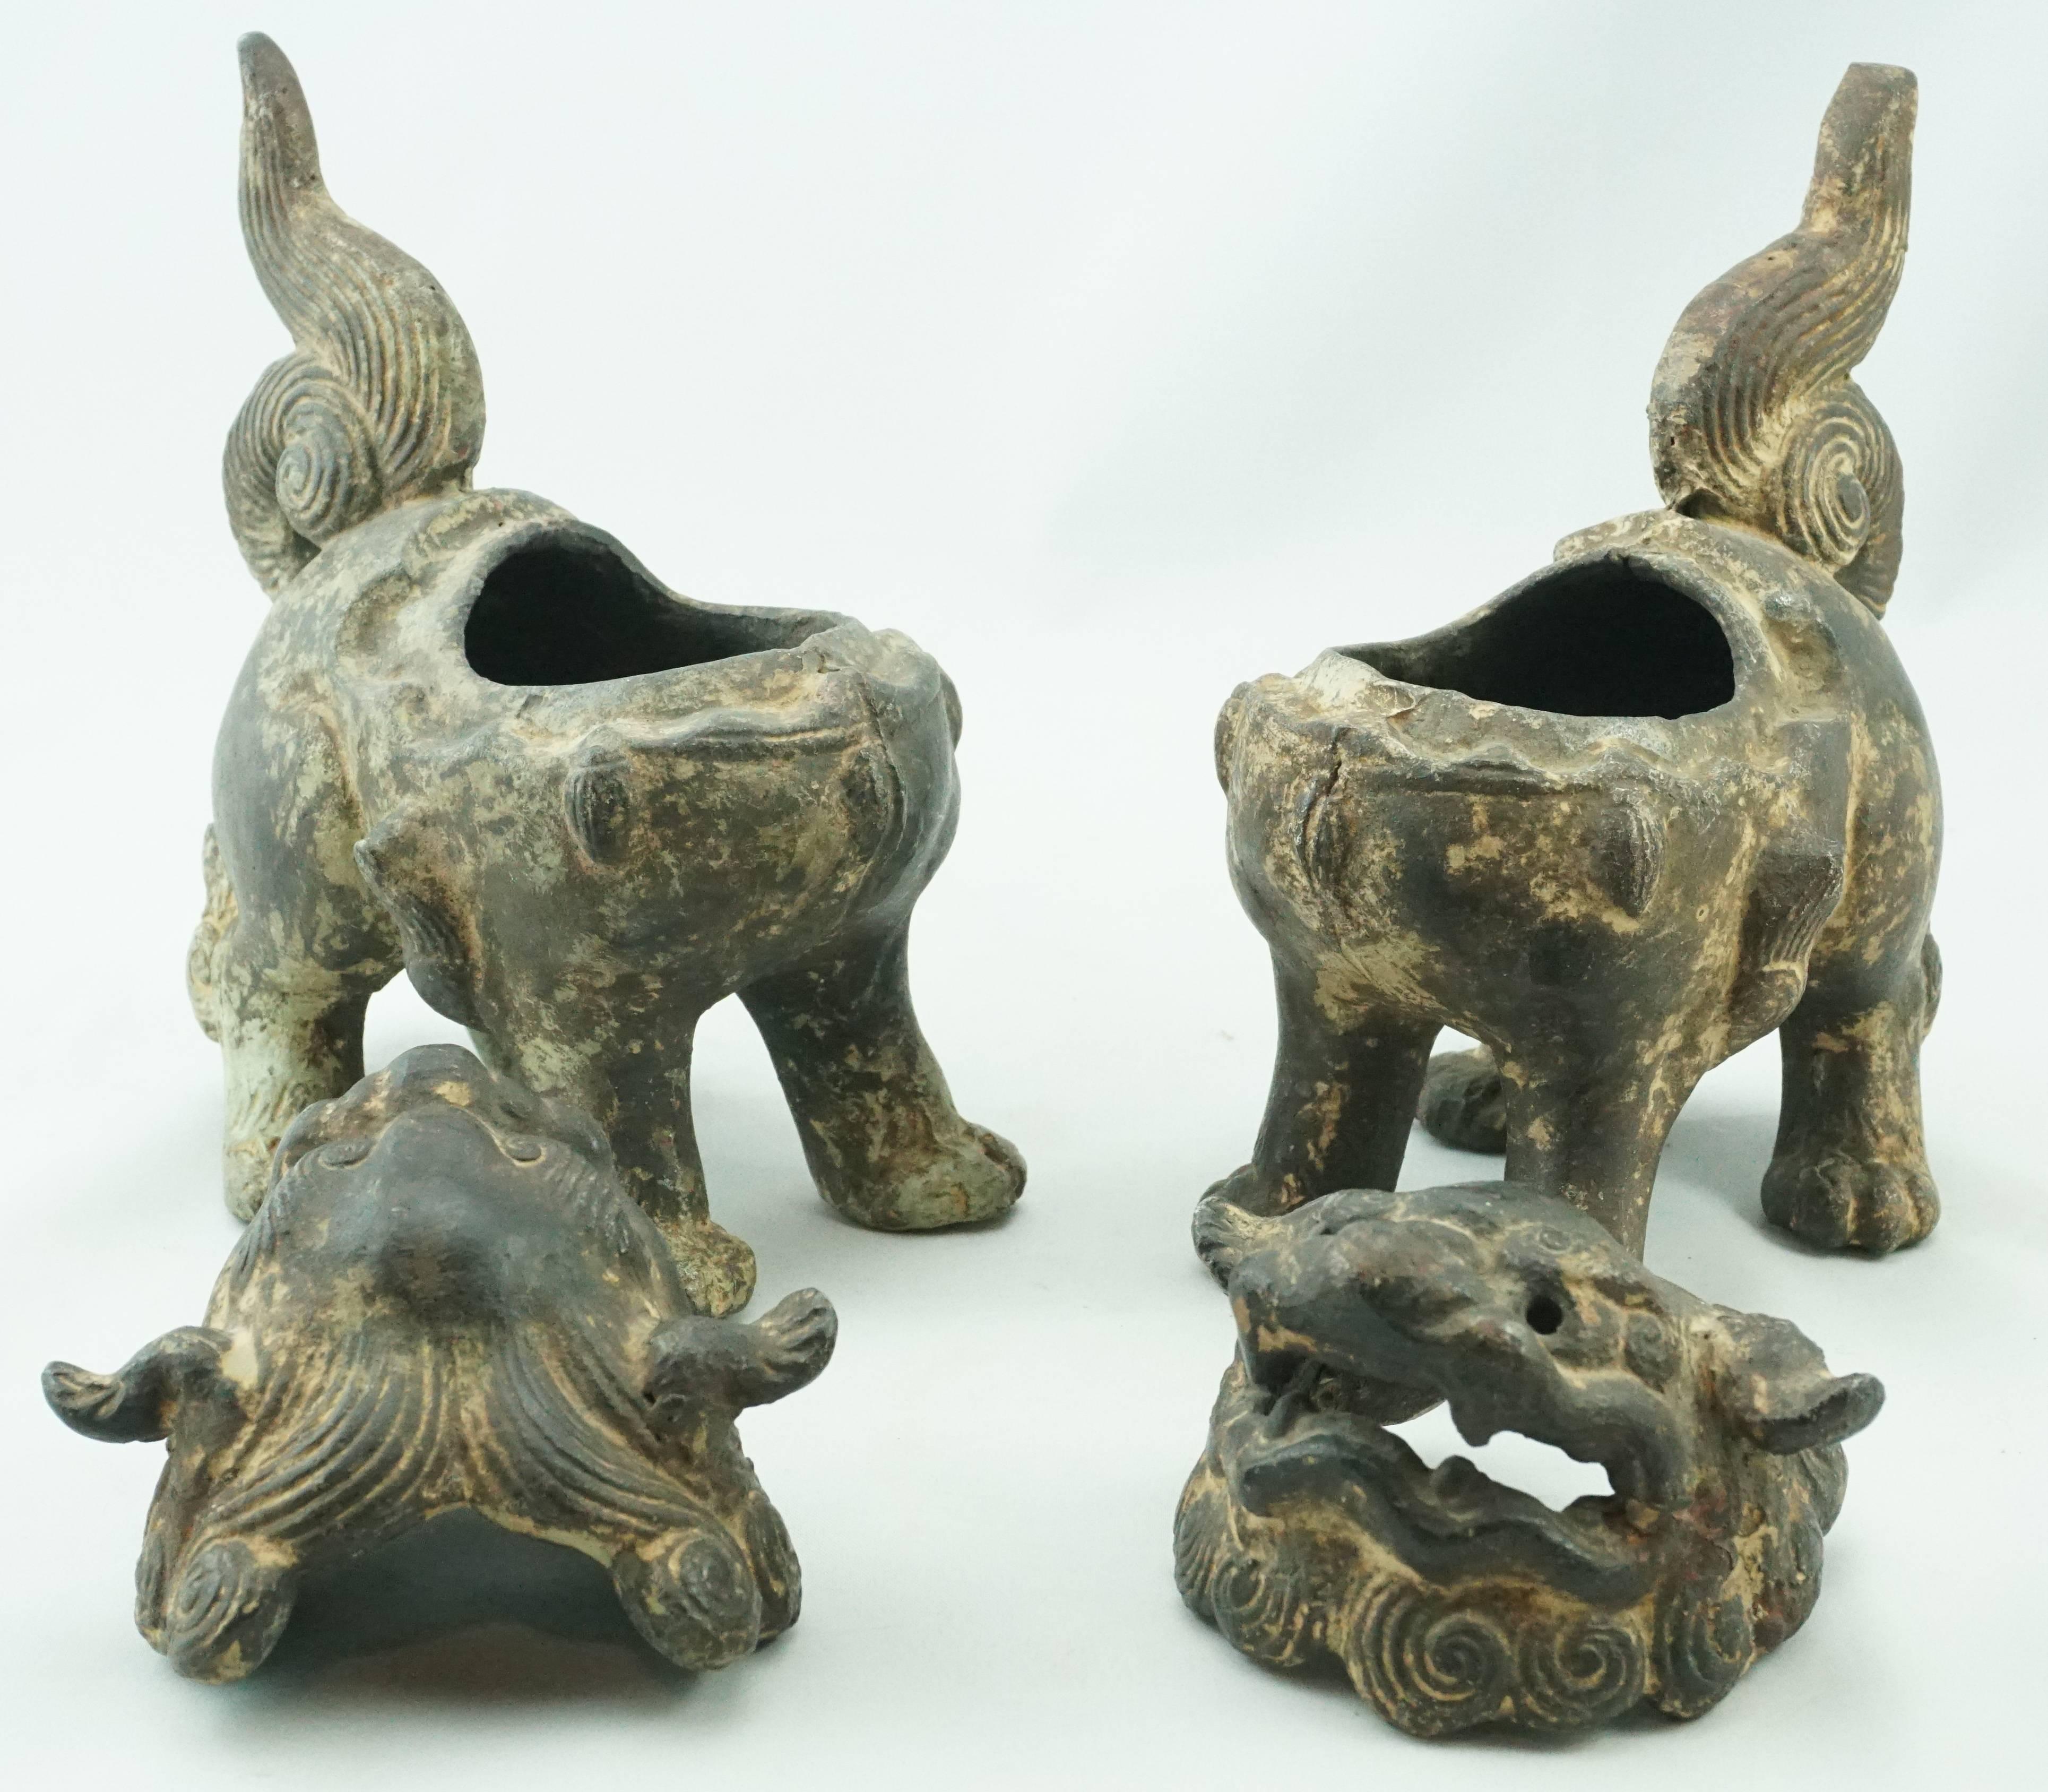 Chinese Export 19th Century Qing Chinese Cast Iron Foo Dogs Lions Incense Burners